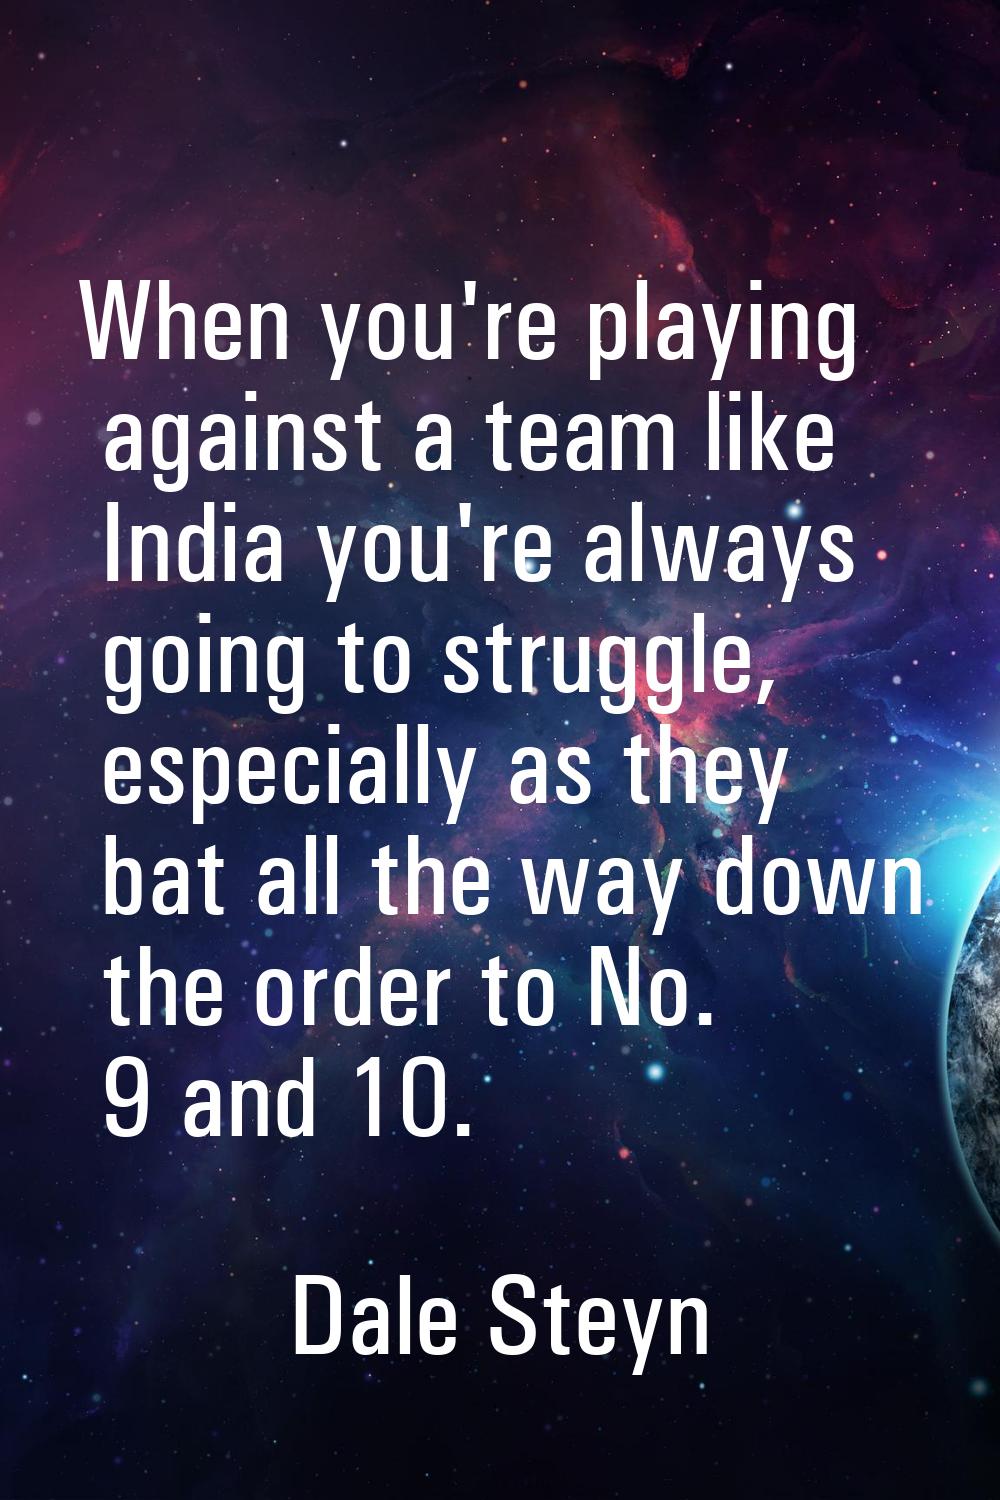 When you're playing against a team like India you're always going to struggle, especially as they b